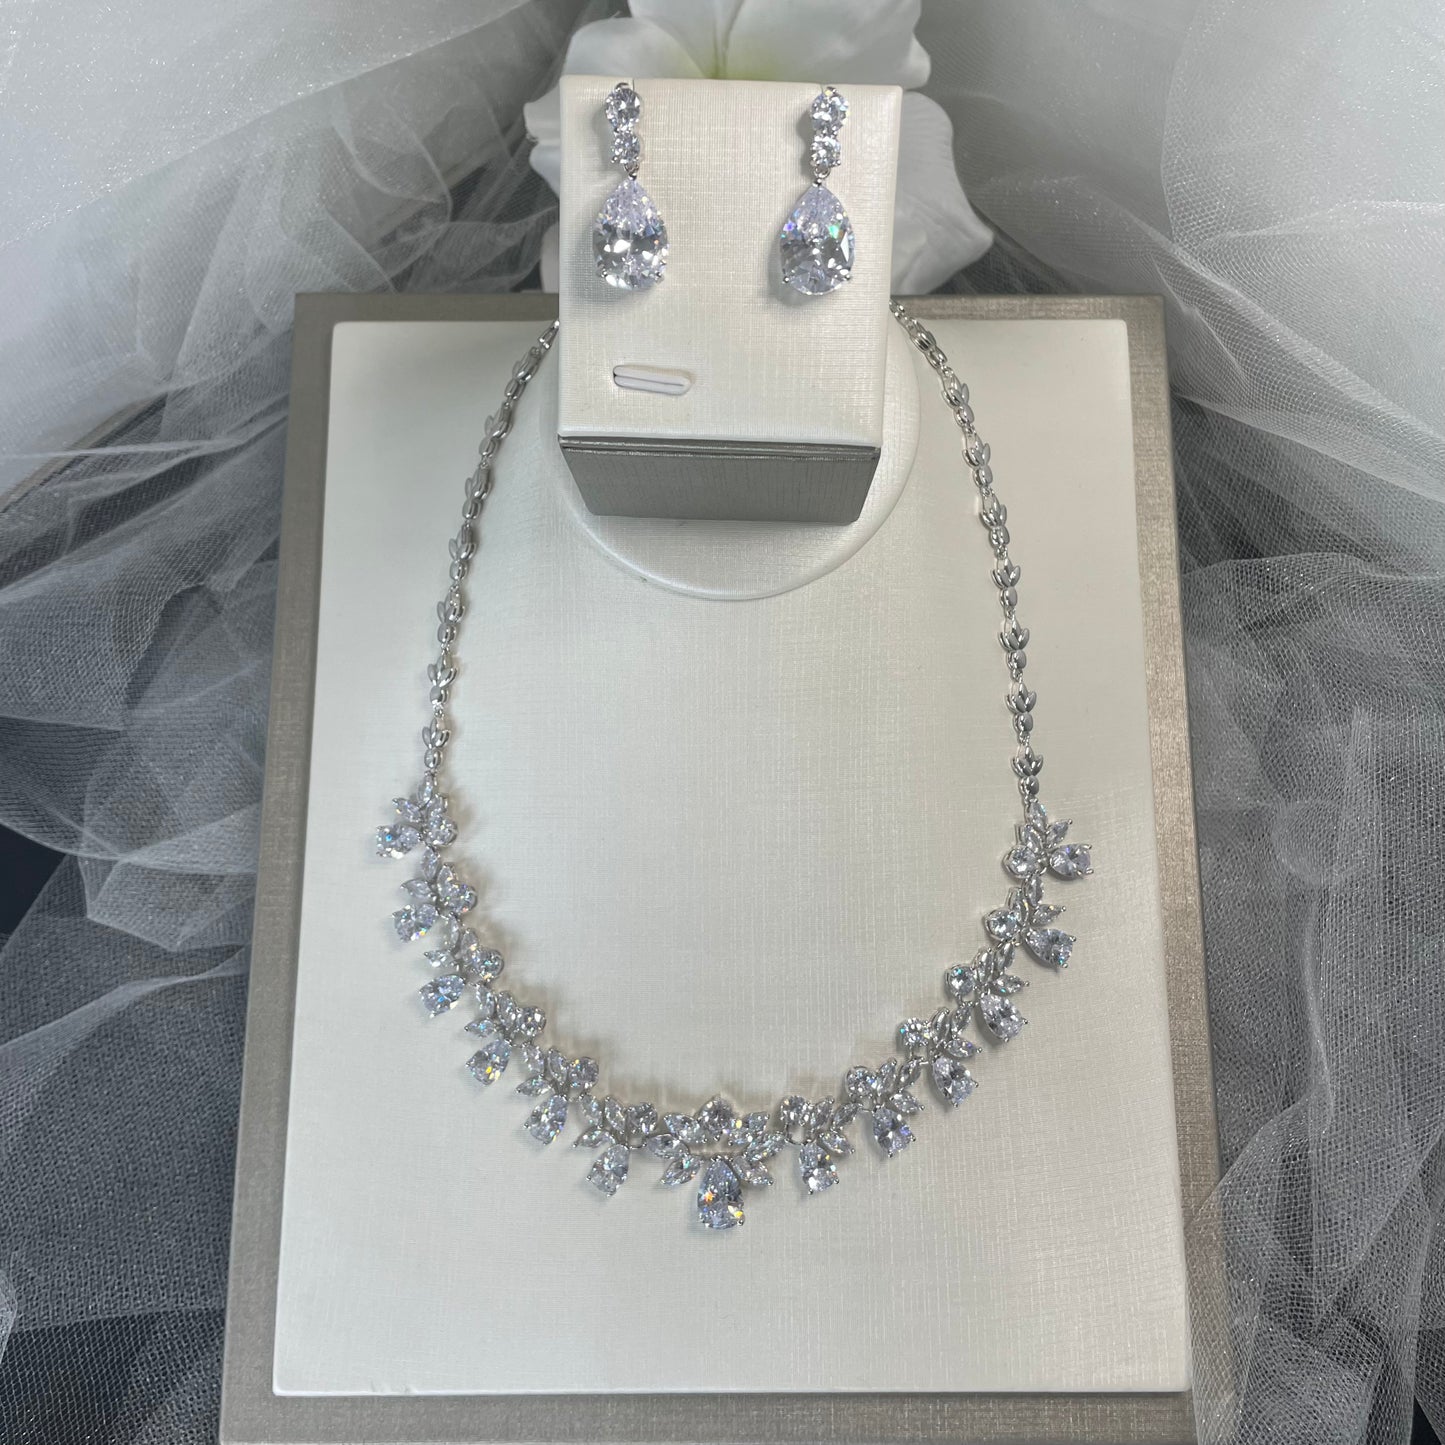 Amelia Bridal Jewelry Set with Necklace and Earrings in CZ Cubic Zirconia - Divine Bridal